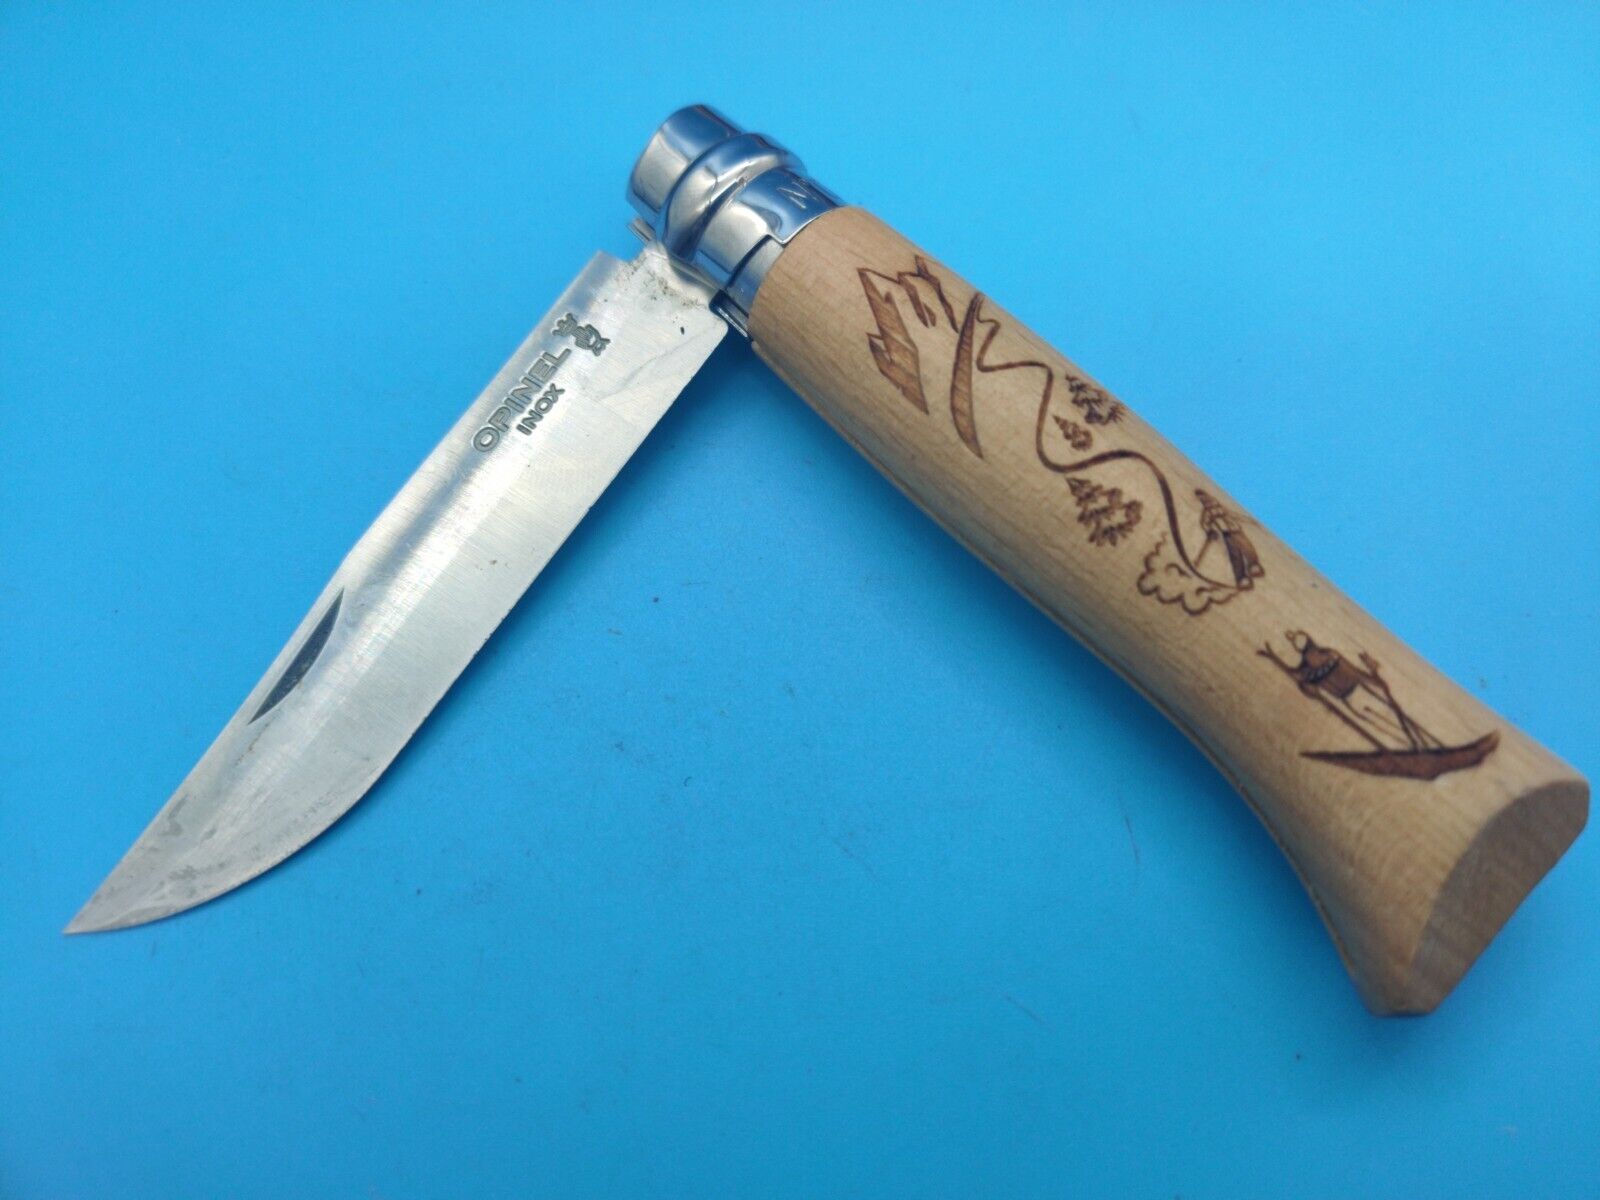 USED Opinel #08 ENGRAVED Limited Edition Pocket Knife No. 8 a